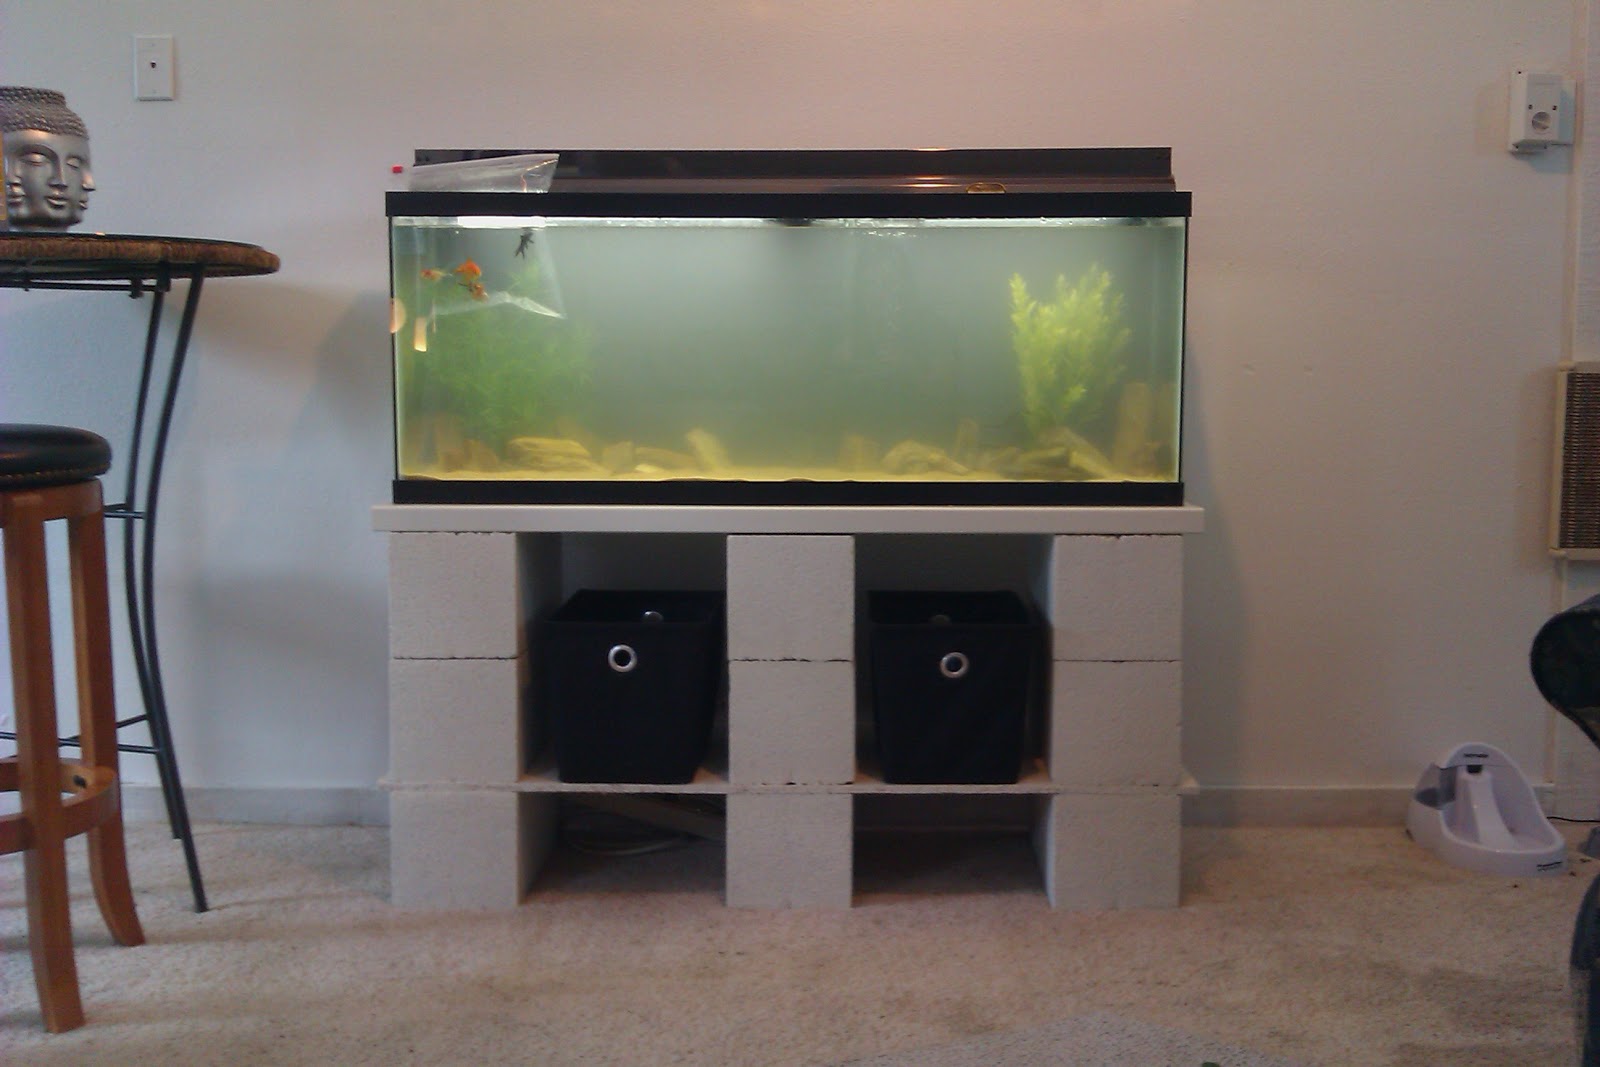 added two storage bins to the shelves to hold fish food and supplies 